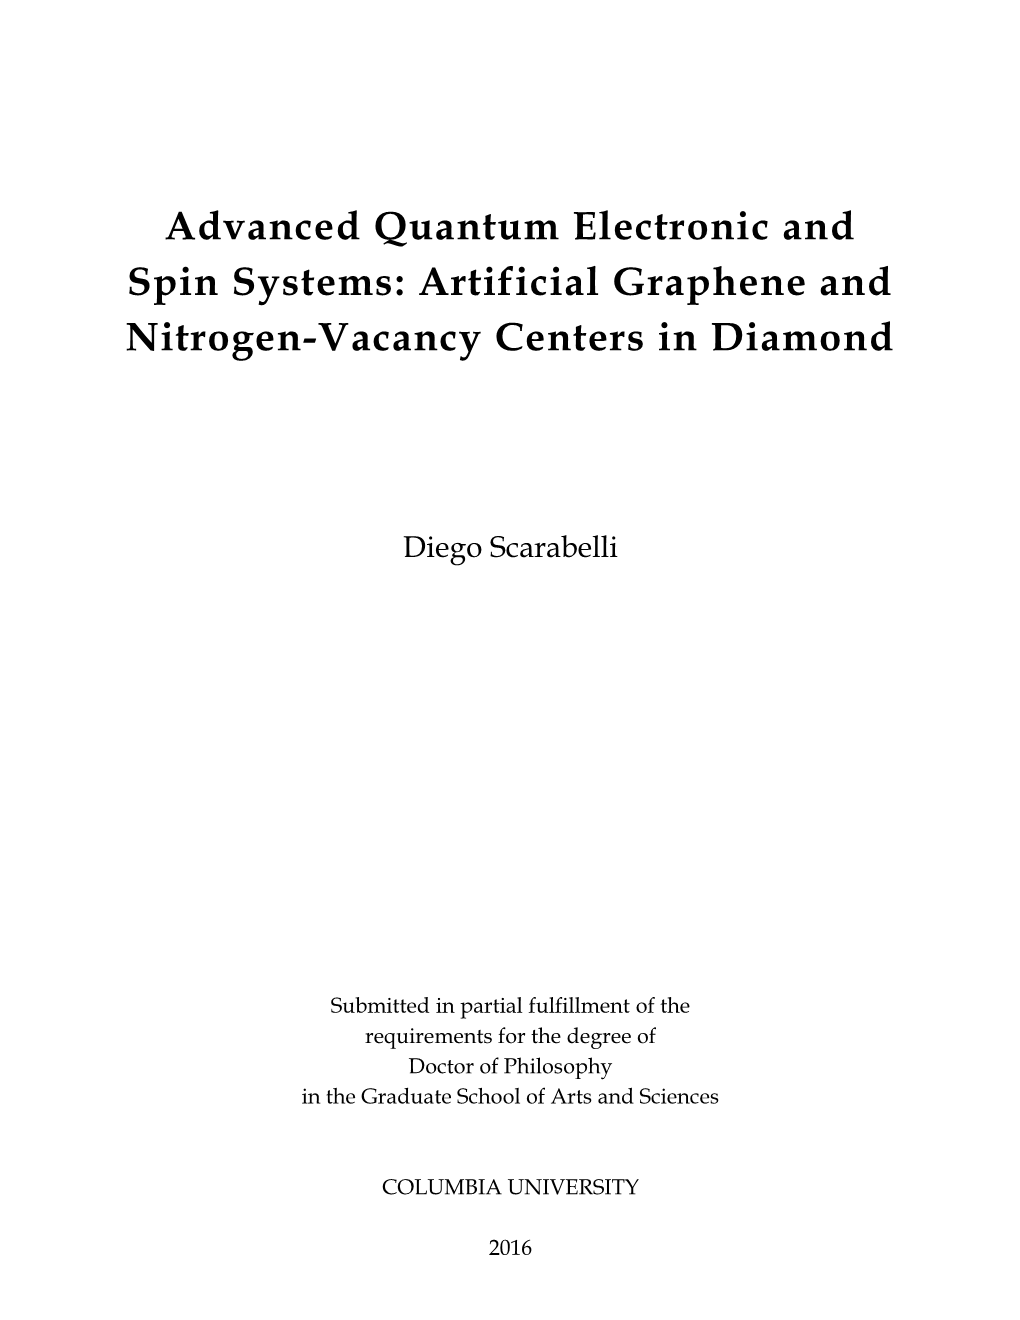 Advanced Quantum Electronic and Spin Systems: Artificial Graphene and Nitrogen-Vacancy Centers in Diamond